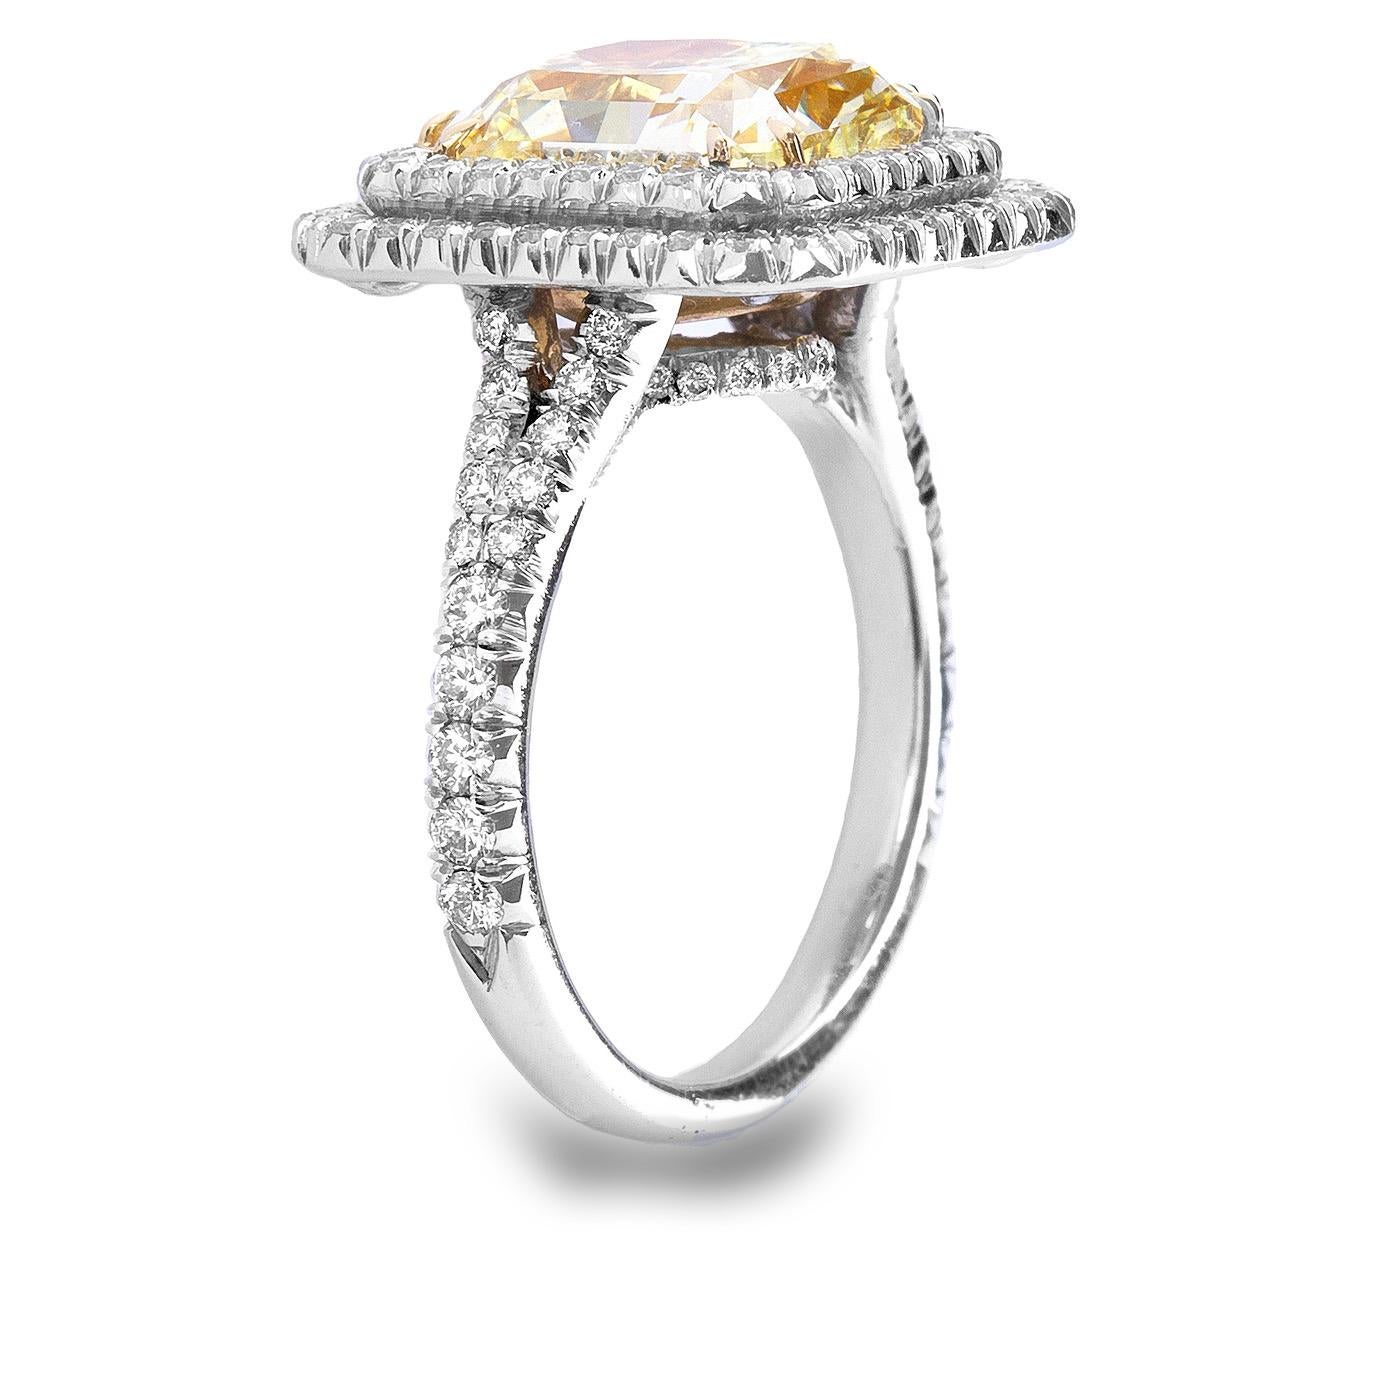 Impressive is just one of the many attributes of this double halo Ring.
GIA Certified 4.68 carat fancy Yellow Radiant cut Diamond. 
Graded by the GIA VVS2 in clarity, the sun like color center stone is set in a magnificent double halo with round